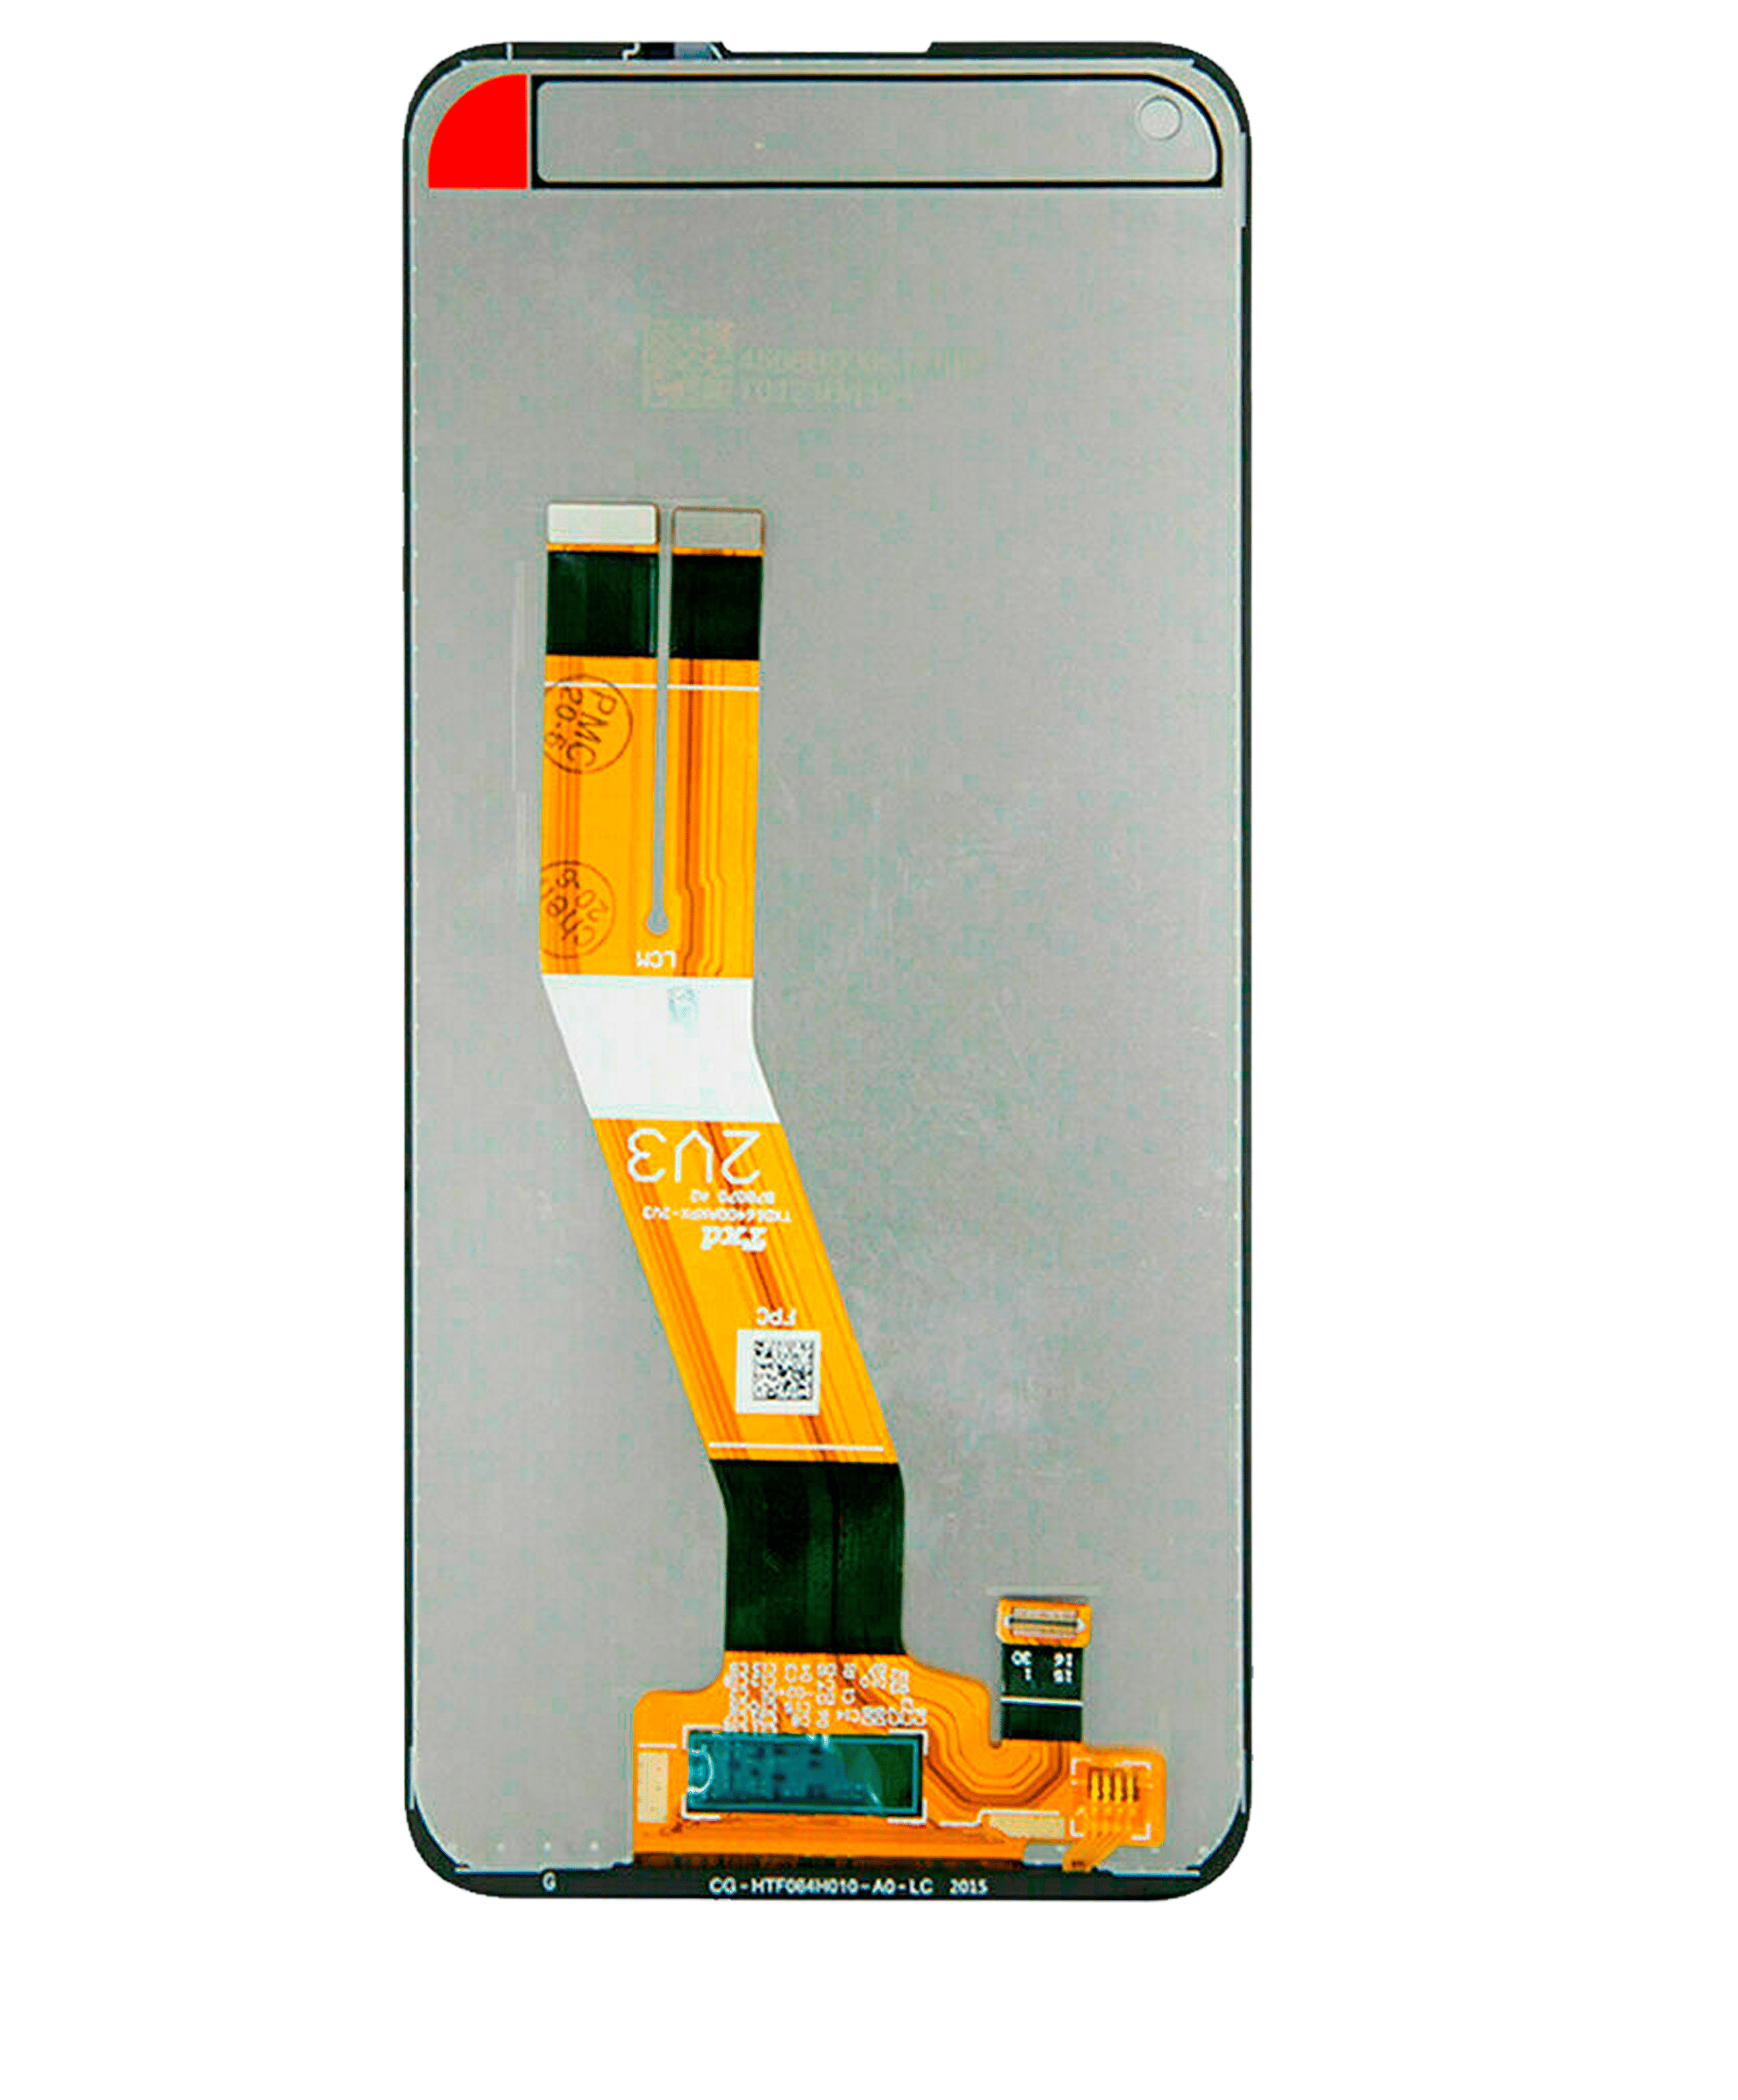 For Samsung Galaxy A11 (A115U / A115A 2020) LCD Screen Replacement Without Frame (US Version)